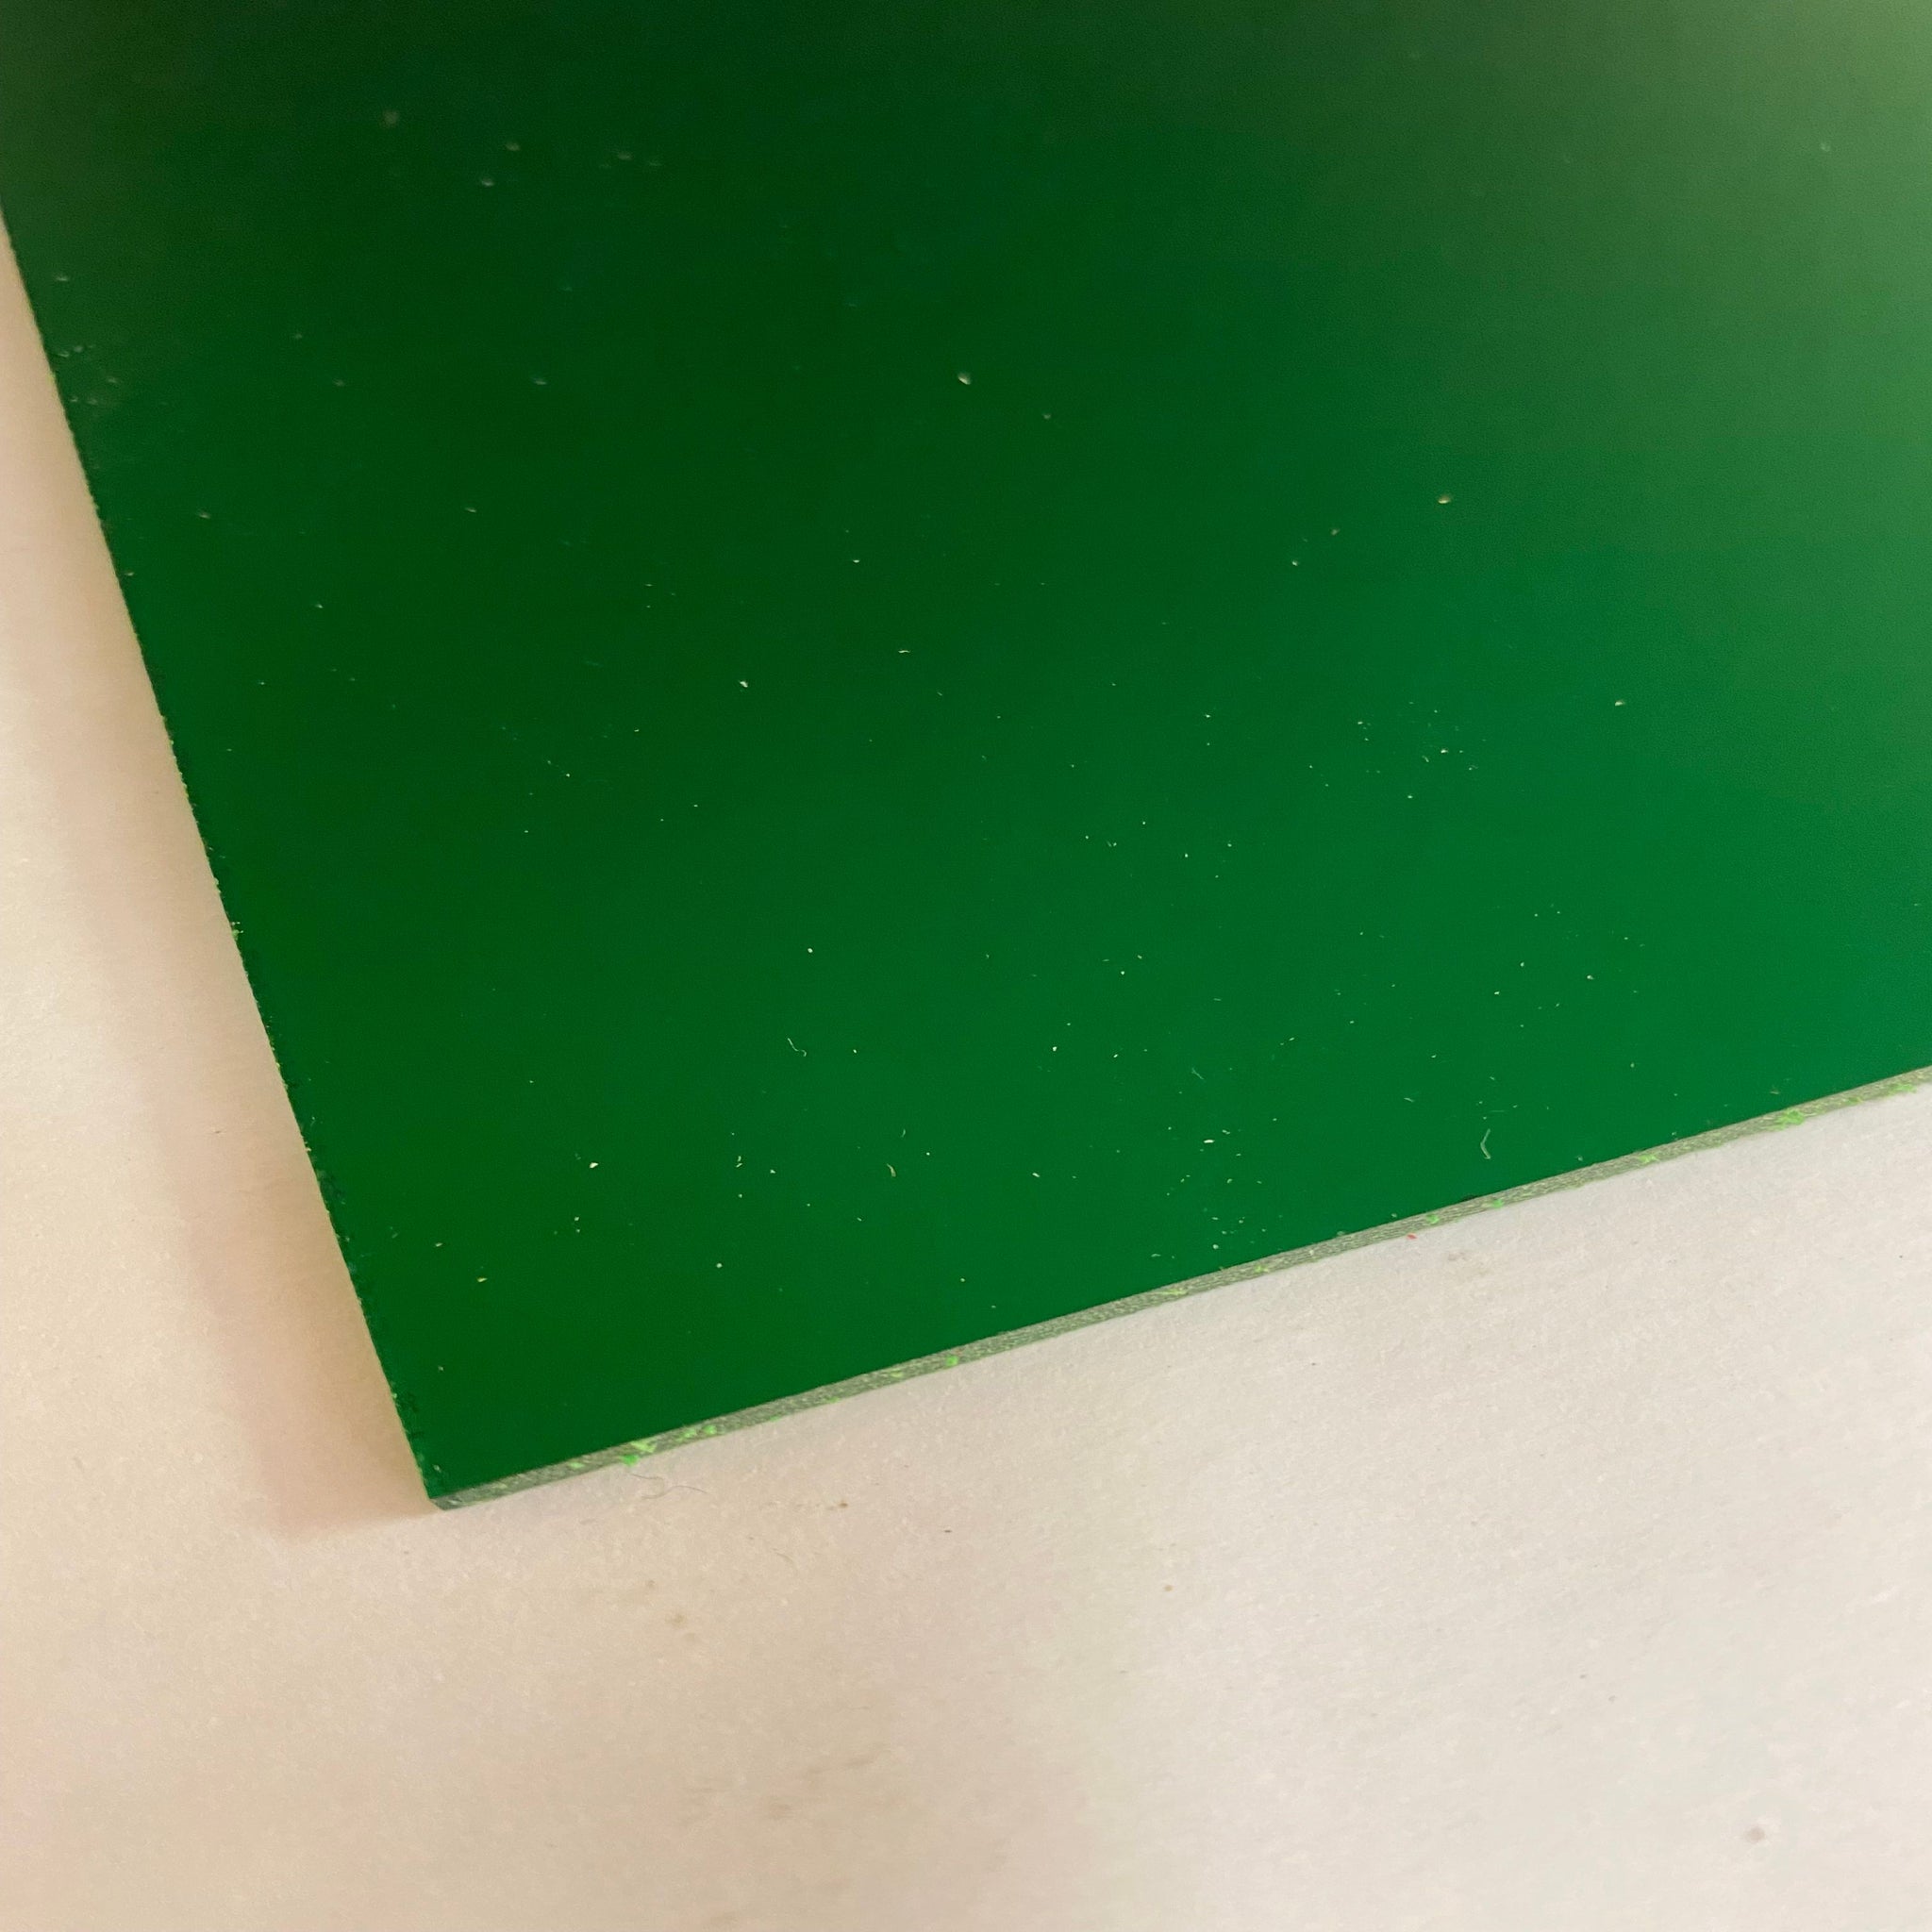 Mirrored Green Acrylic for Laser Cutting & Engraving – MakerStock